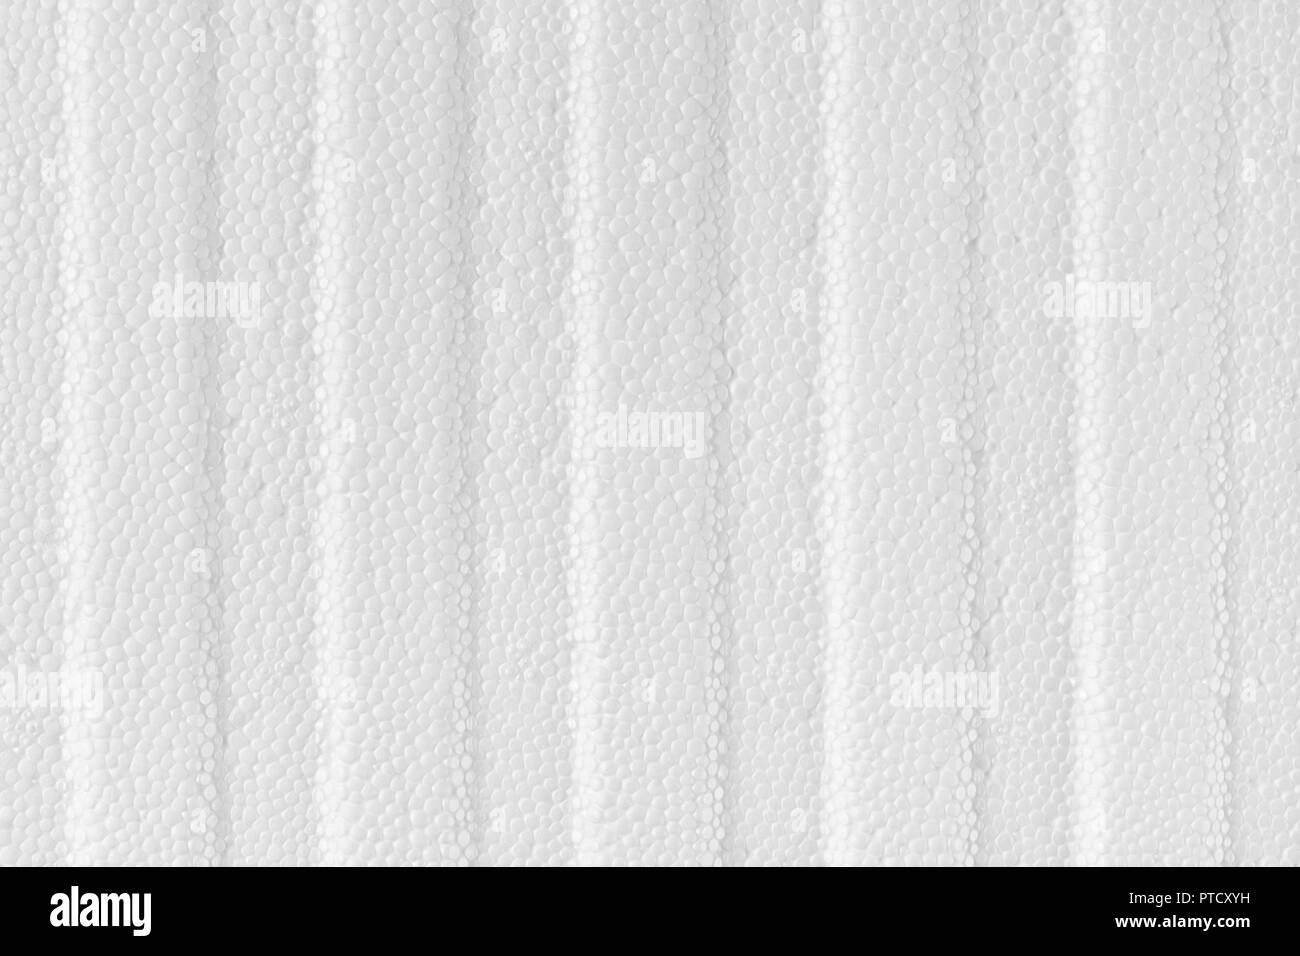 Excellent quality White plastic foam texture Stock Photo by ©wissanustock  157305432, white plastic 